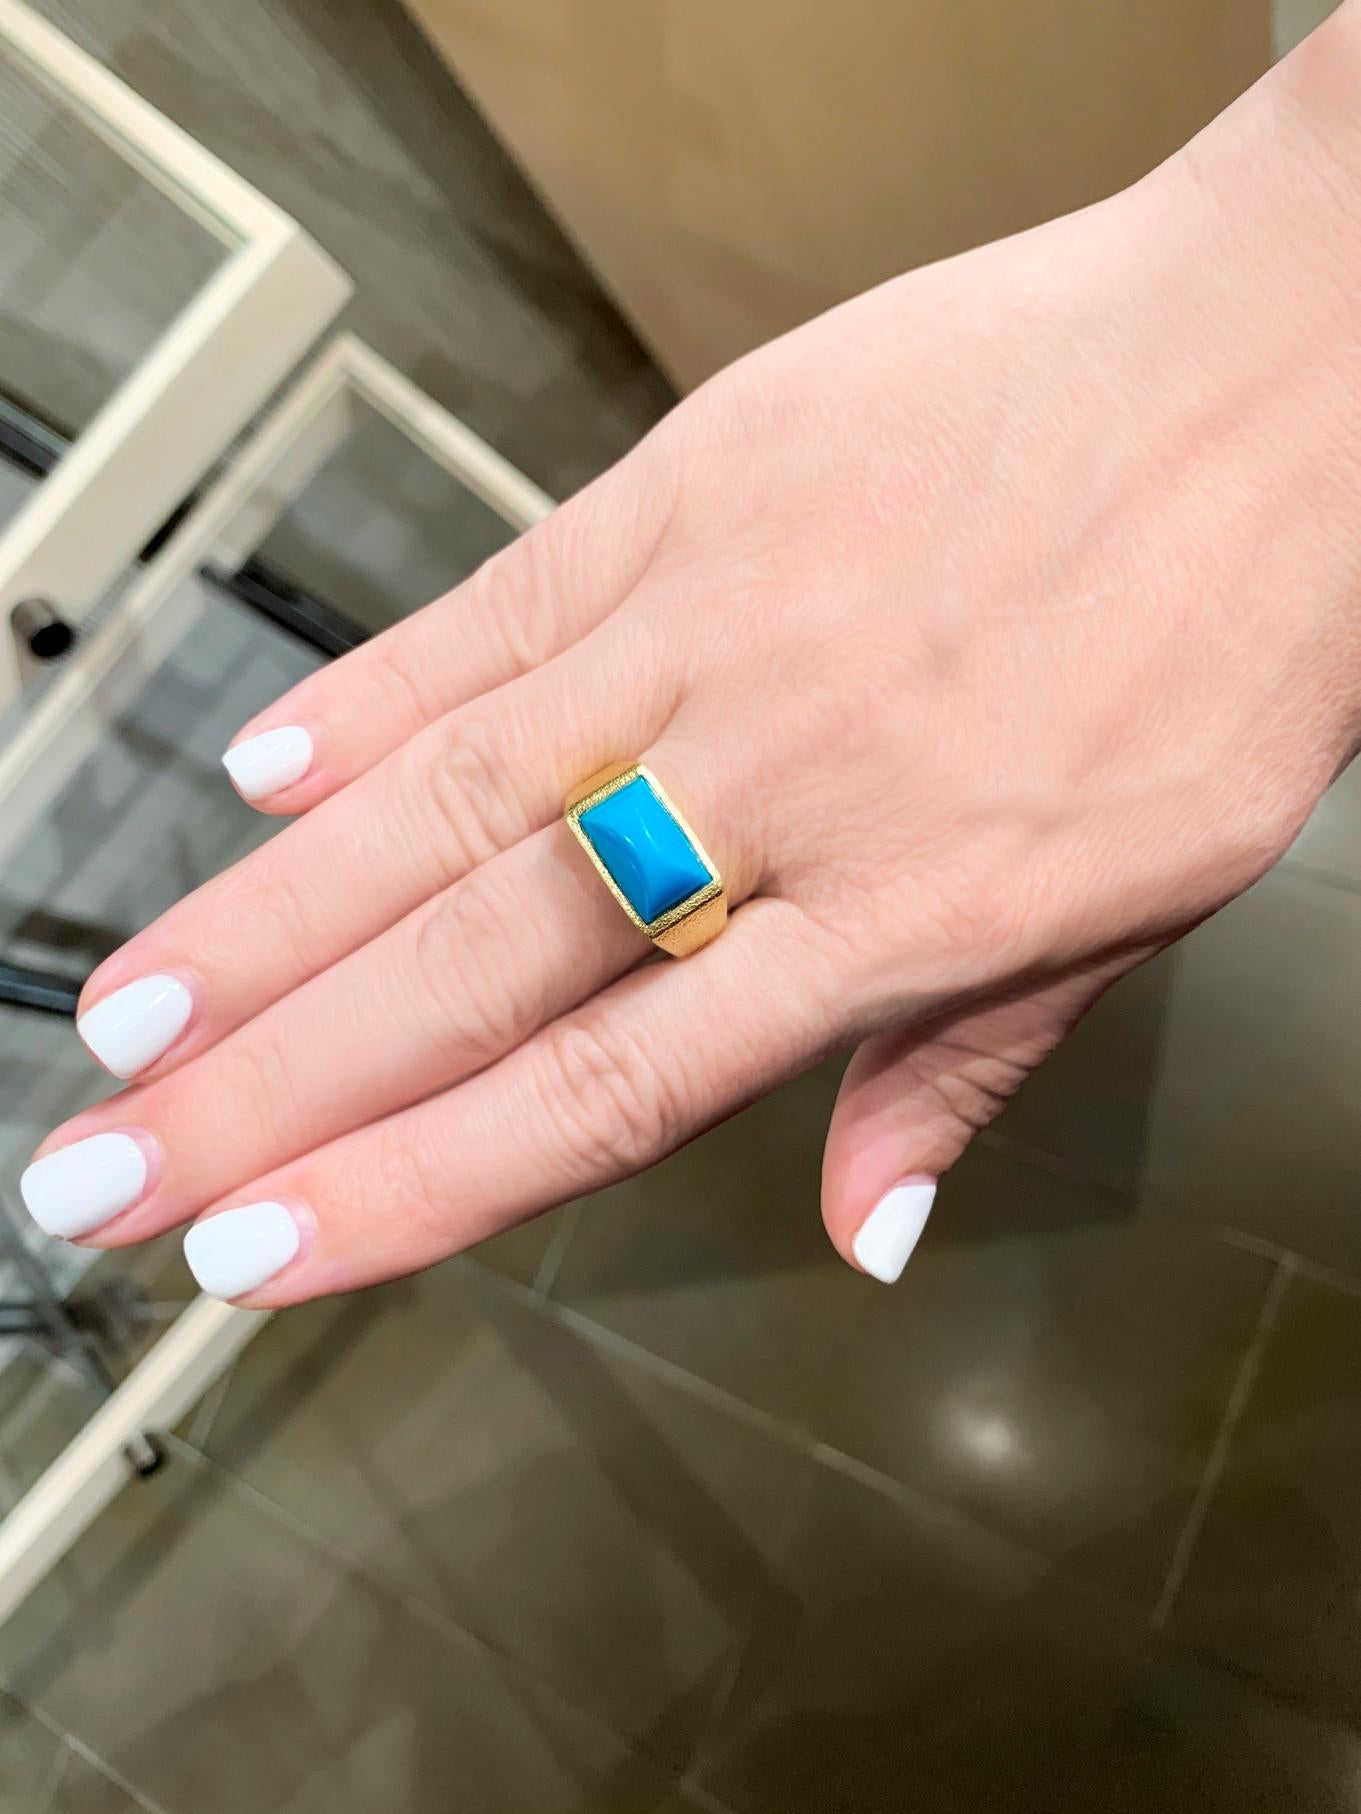 Hot off the bench! One of a Kind Signet Ring handcrafted by acclaimed jewelry maker Devta Doolan in the artist's intricately-textured and signature finished 18k yellow gold showcasing a gorgeous Sleeping Beauty turquoise domed cabochon, bezel-set